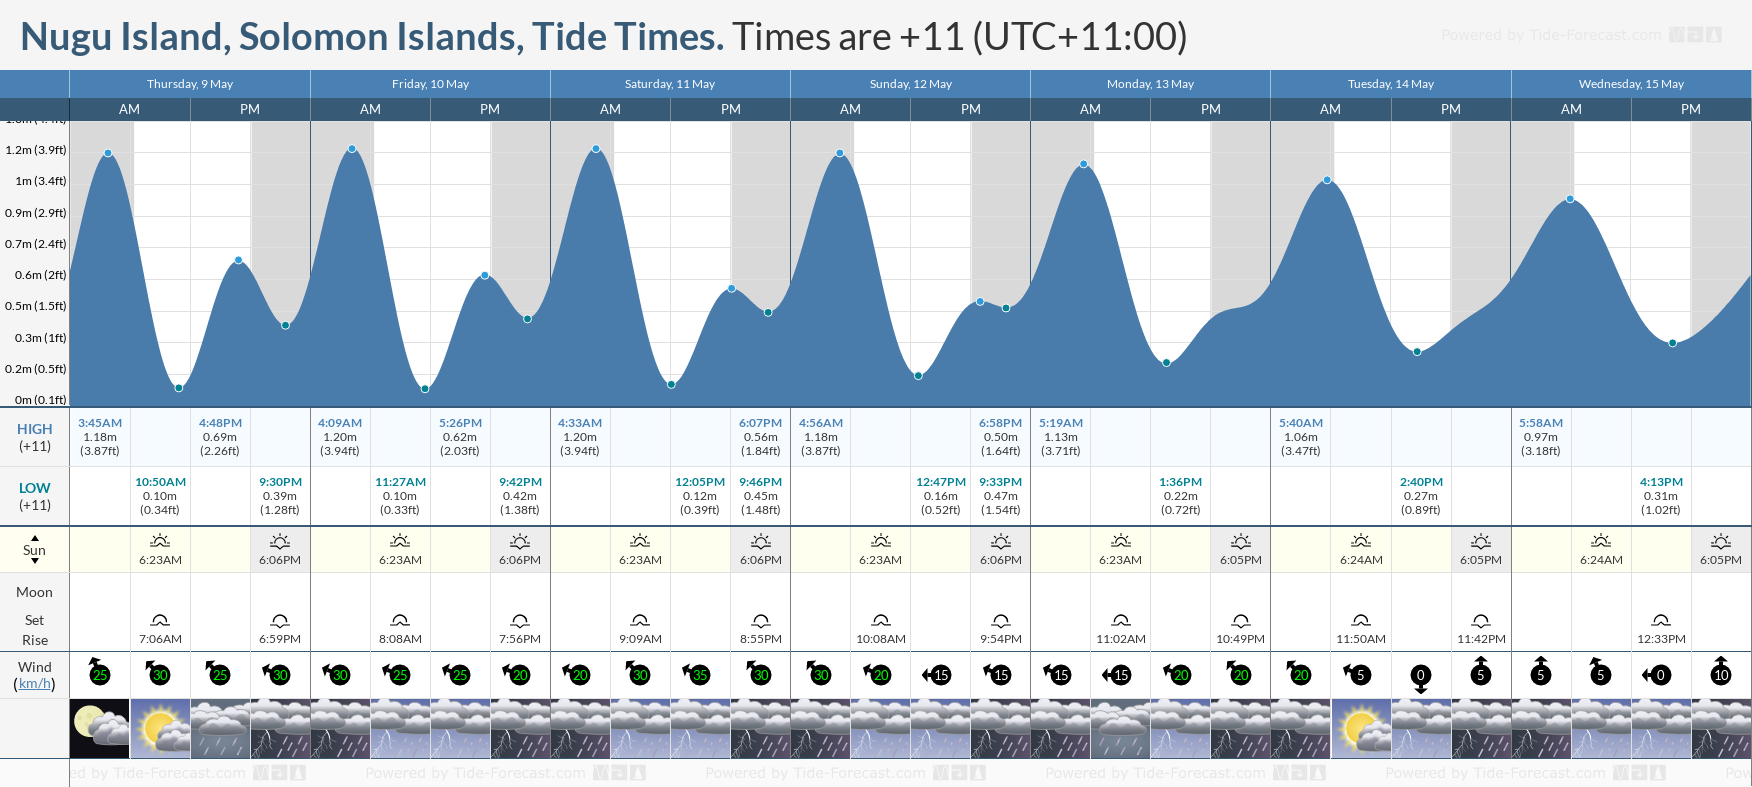 Nugu Island, Solomon Islands Tide Chart including high and low tide tide times for the next 7 days